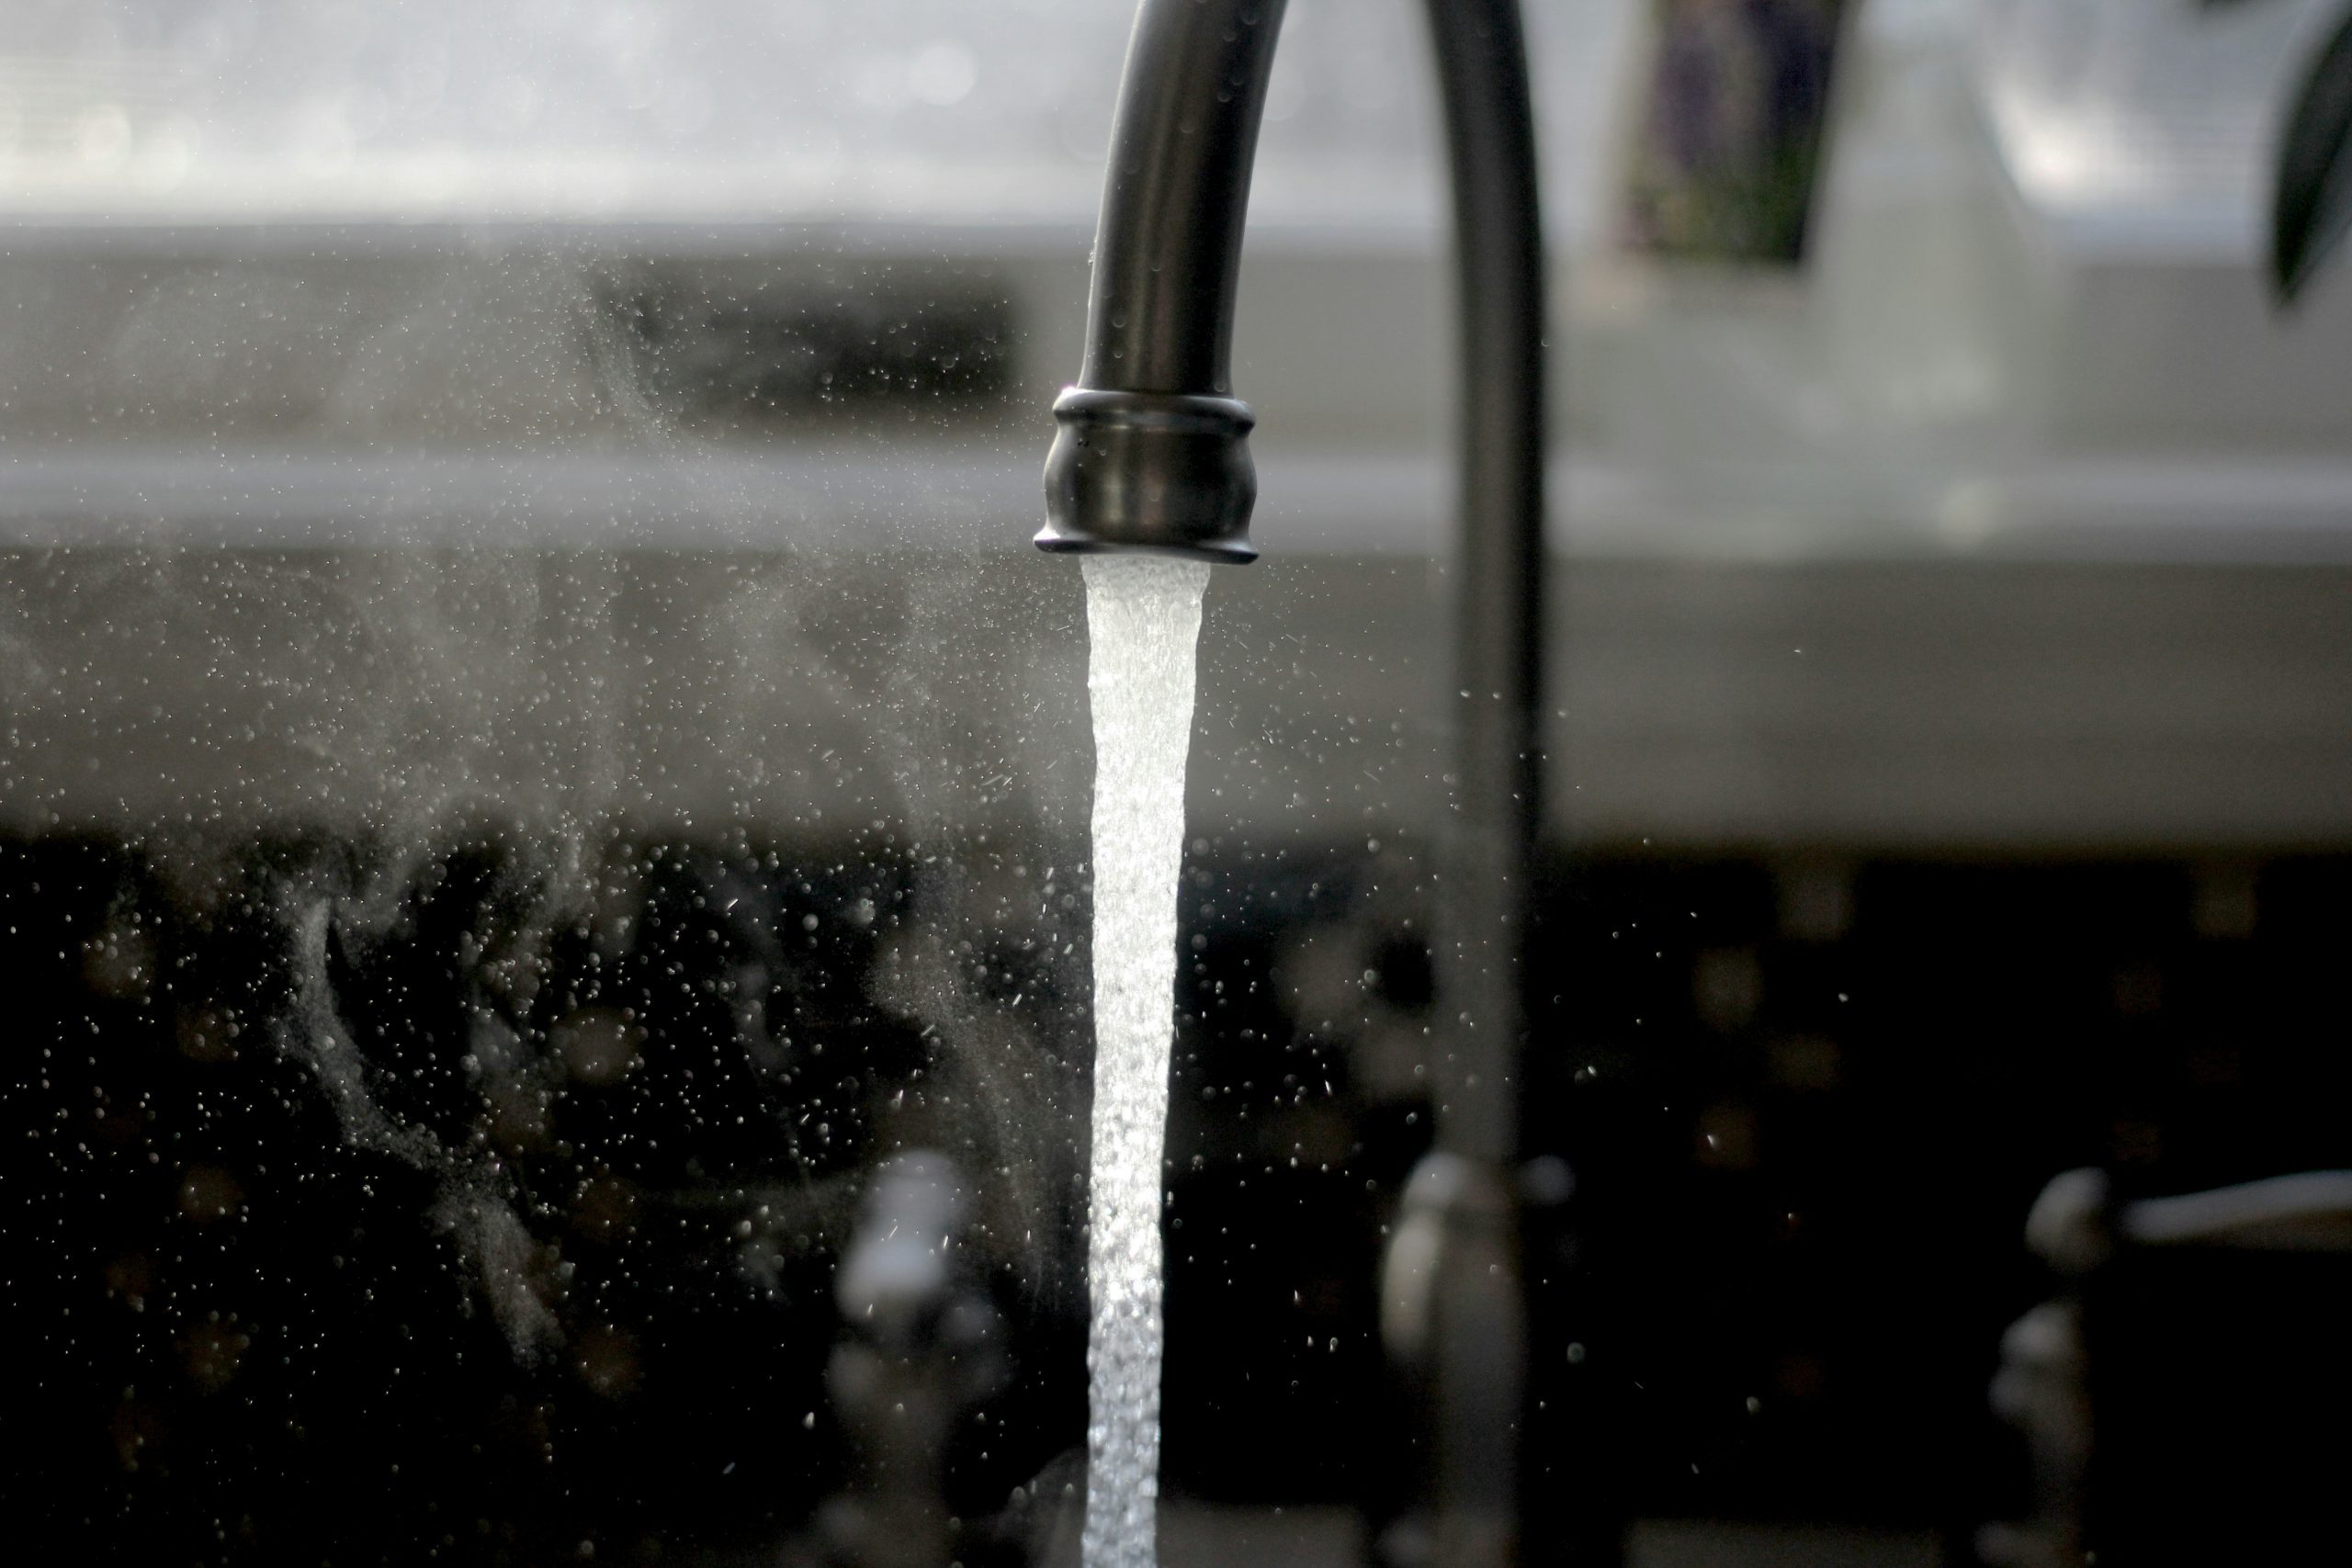 water running out of a kitchen faucet with droplets in the air